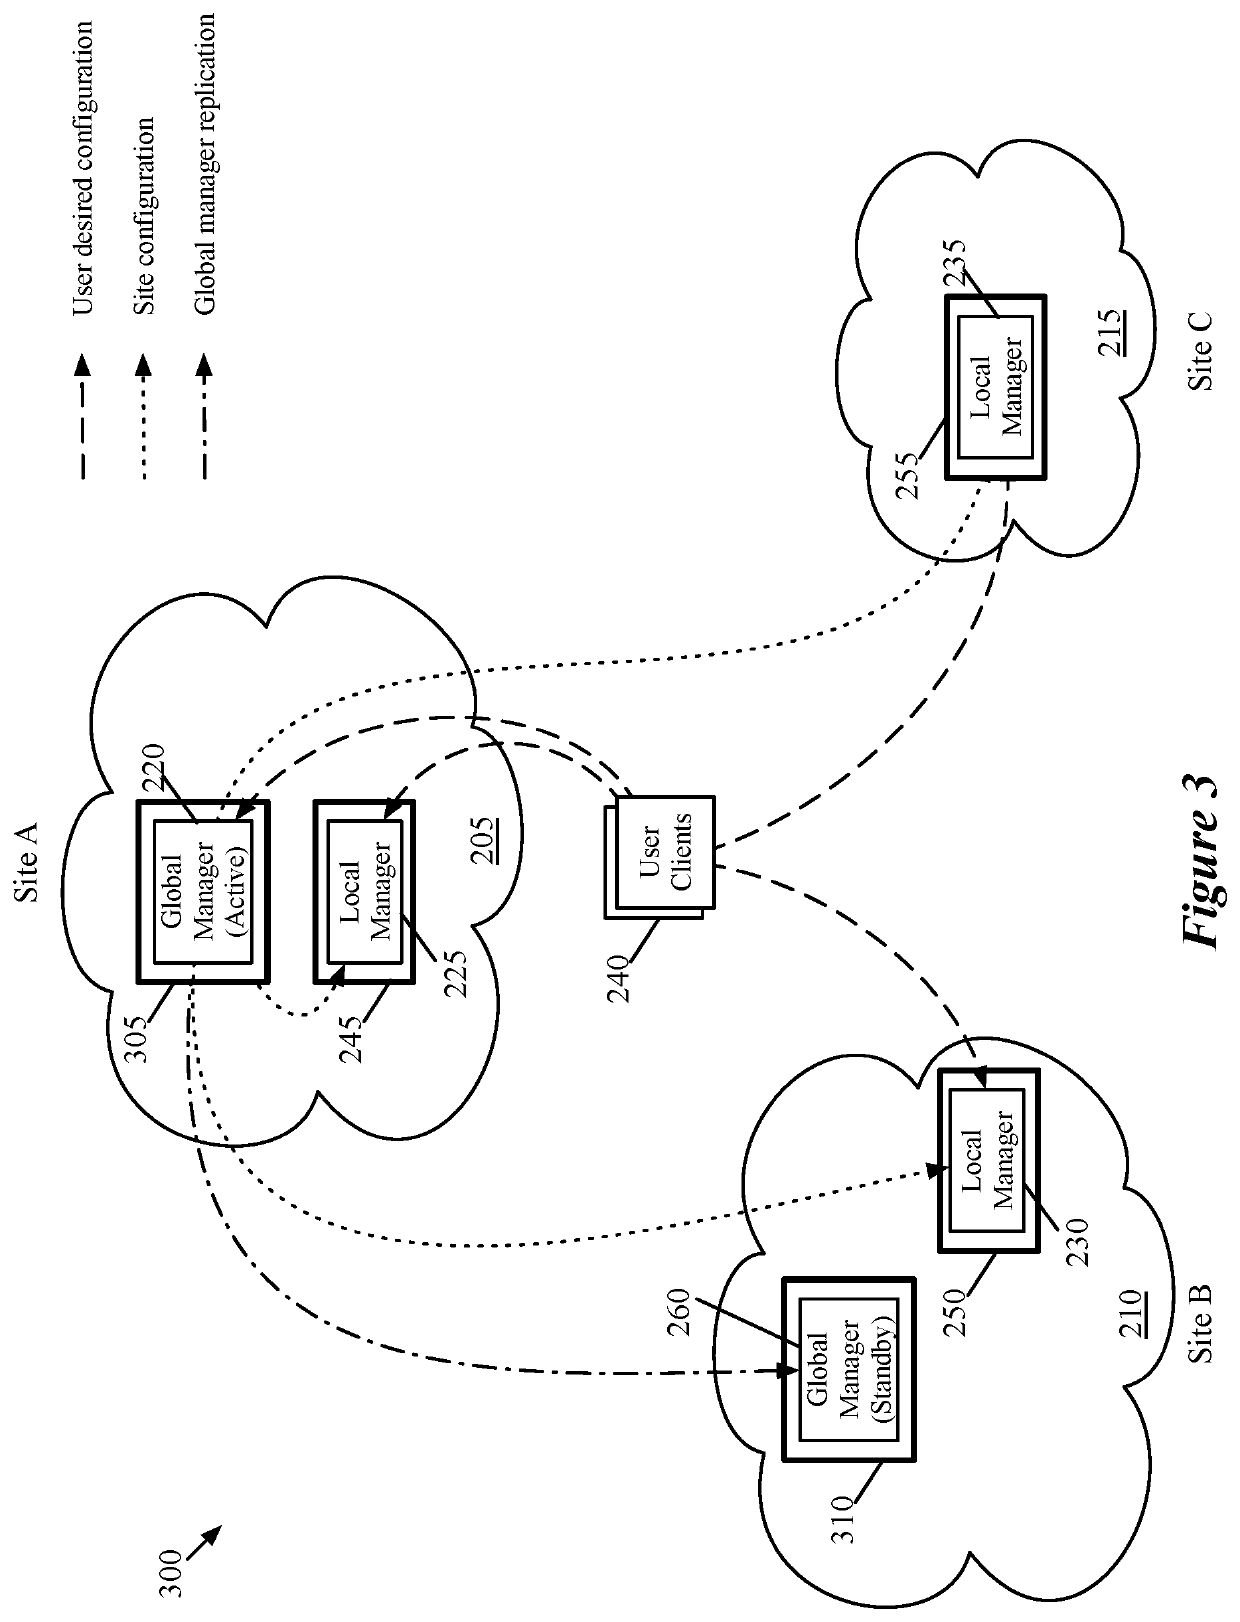 User interface for accessing multi-site logical network